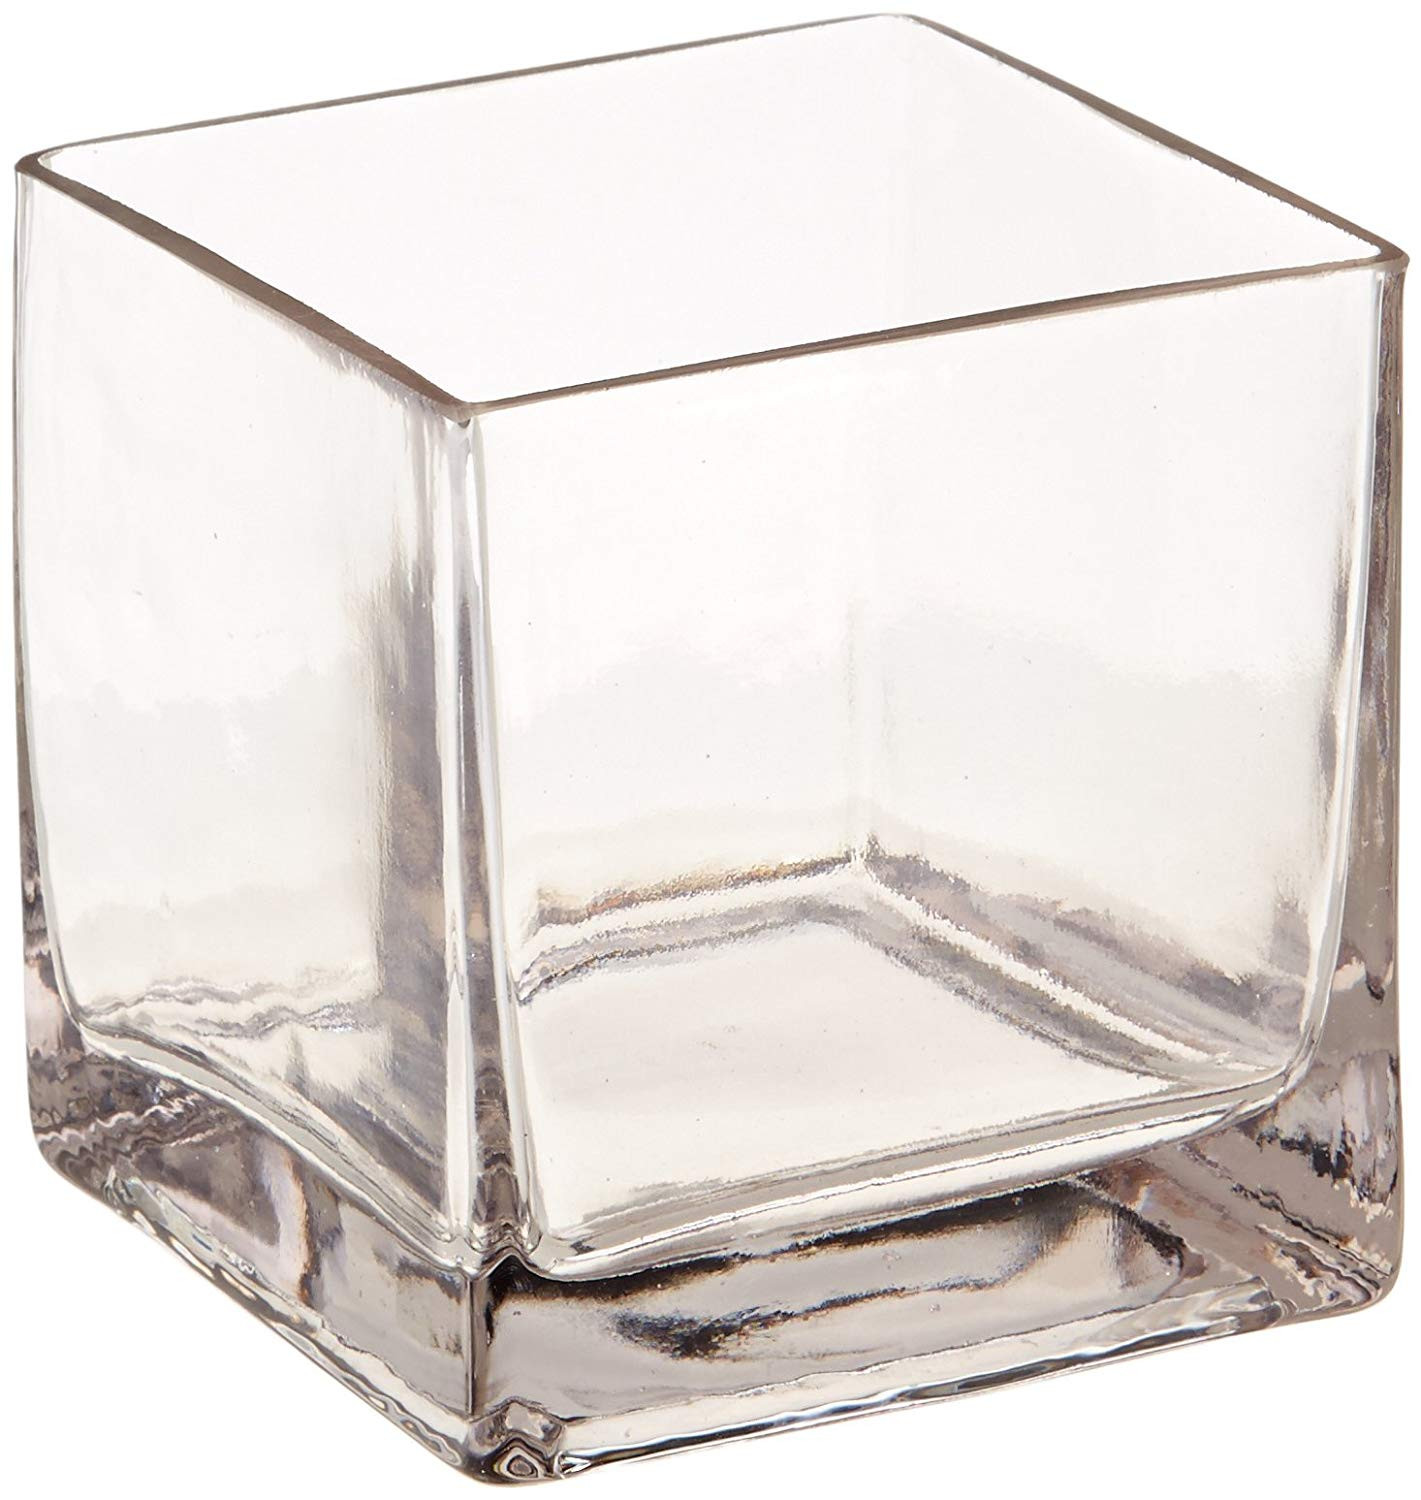 14 Stylish Glass Stones for Vases Bulk 2024 free download glass stones for vases bulk of amazon com 12piece 4 square crystal clear glass vase home kitchen throughout 71 jezfmvnl sl1500